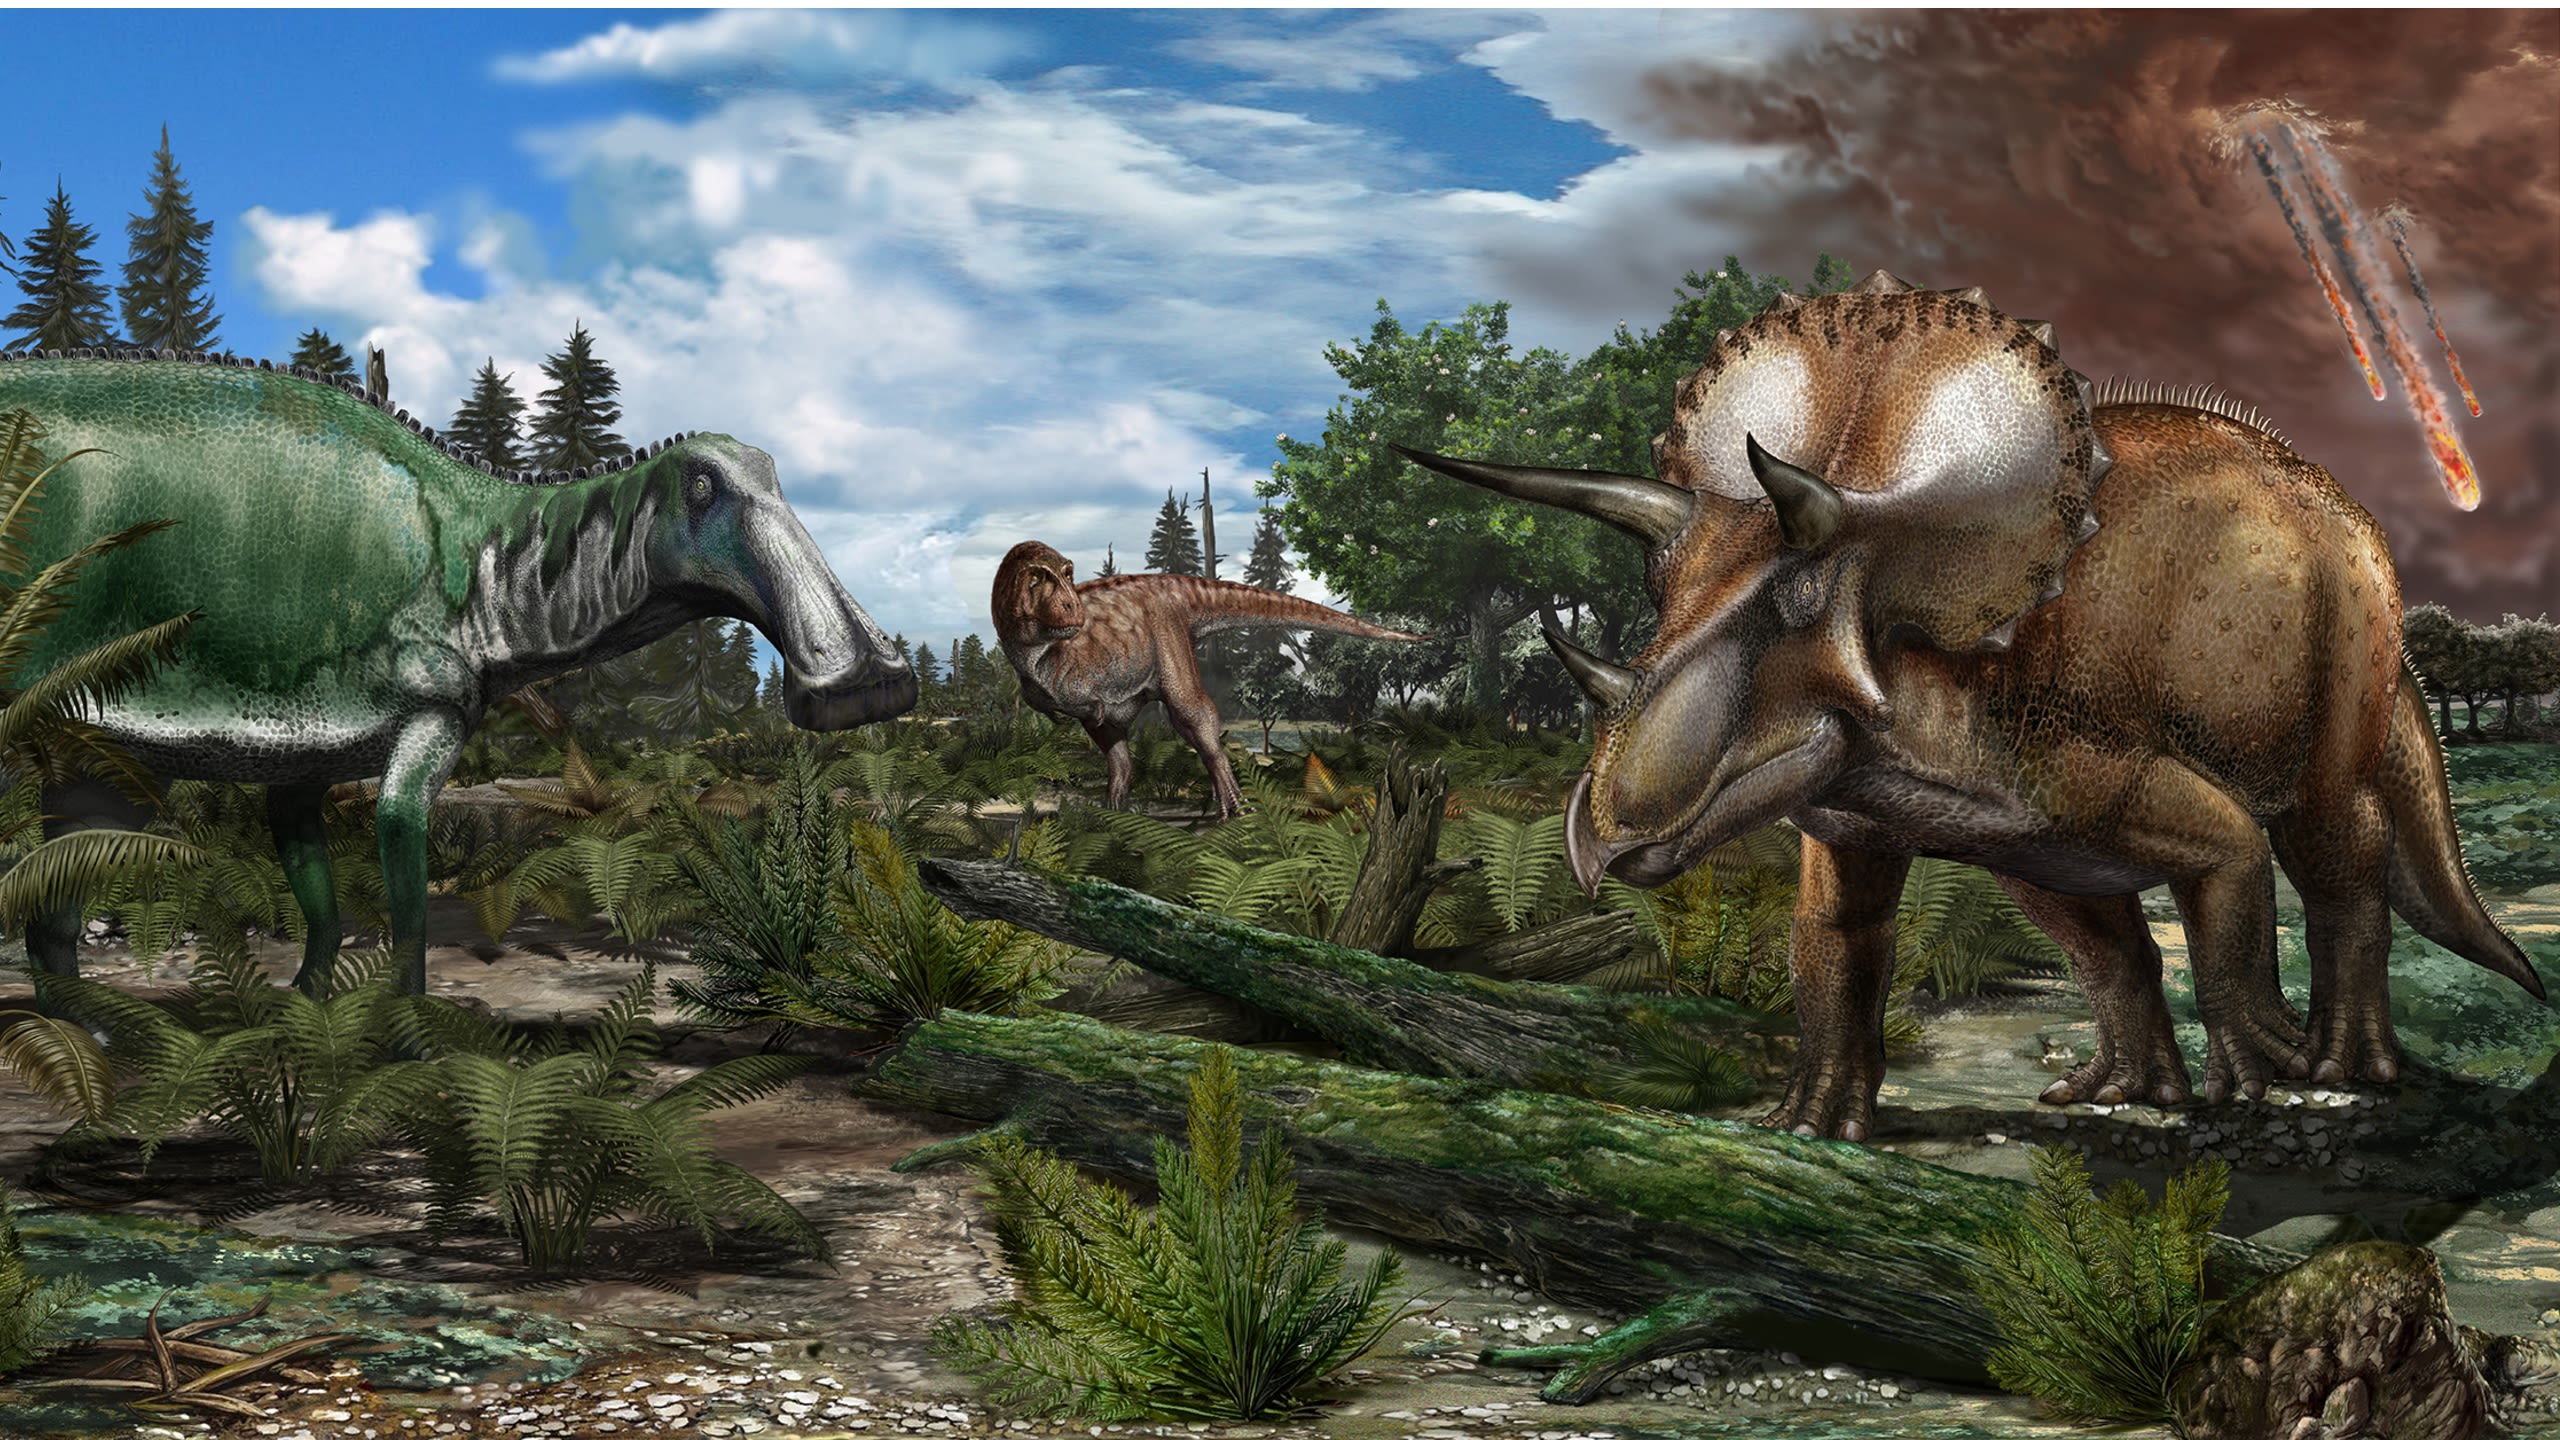 Illustration of dinosaurs as the asteroid strikes